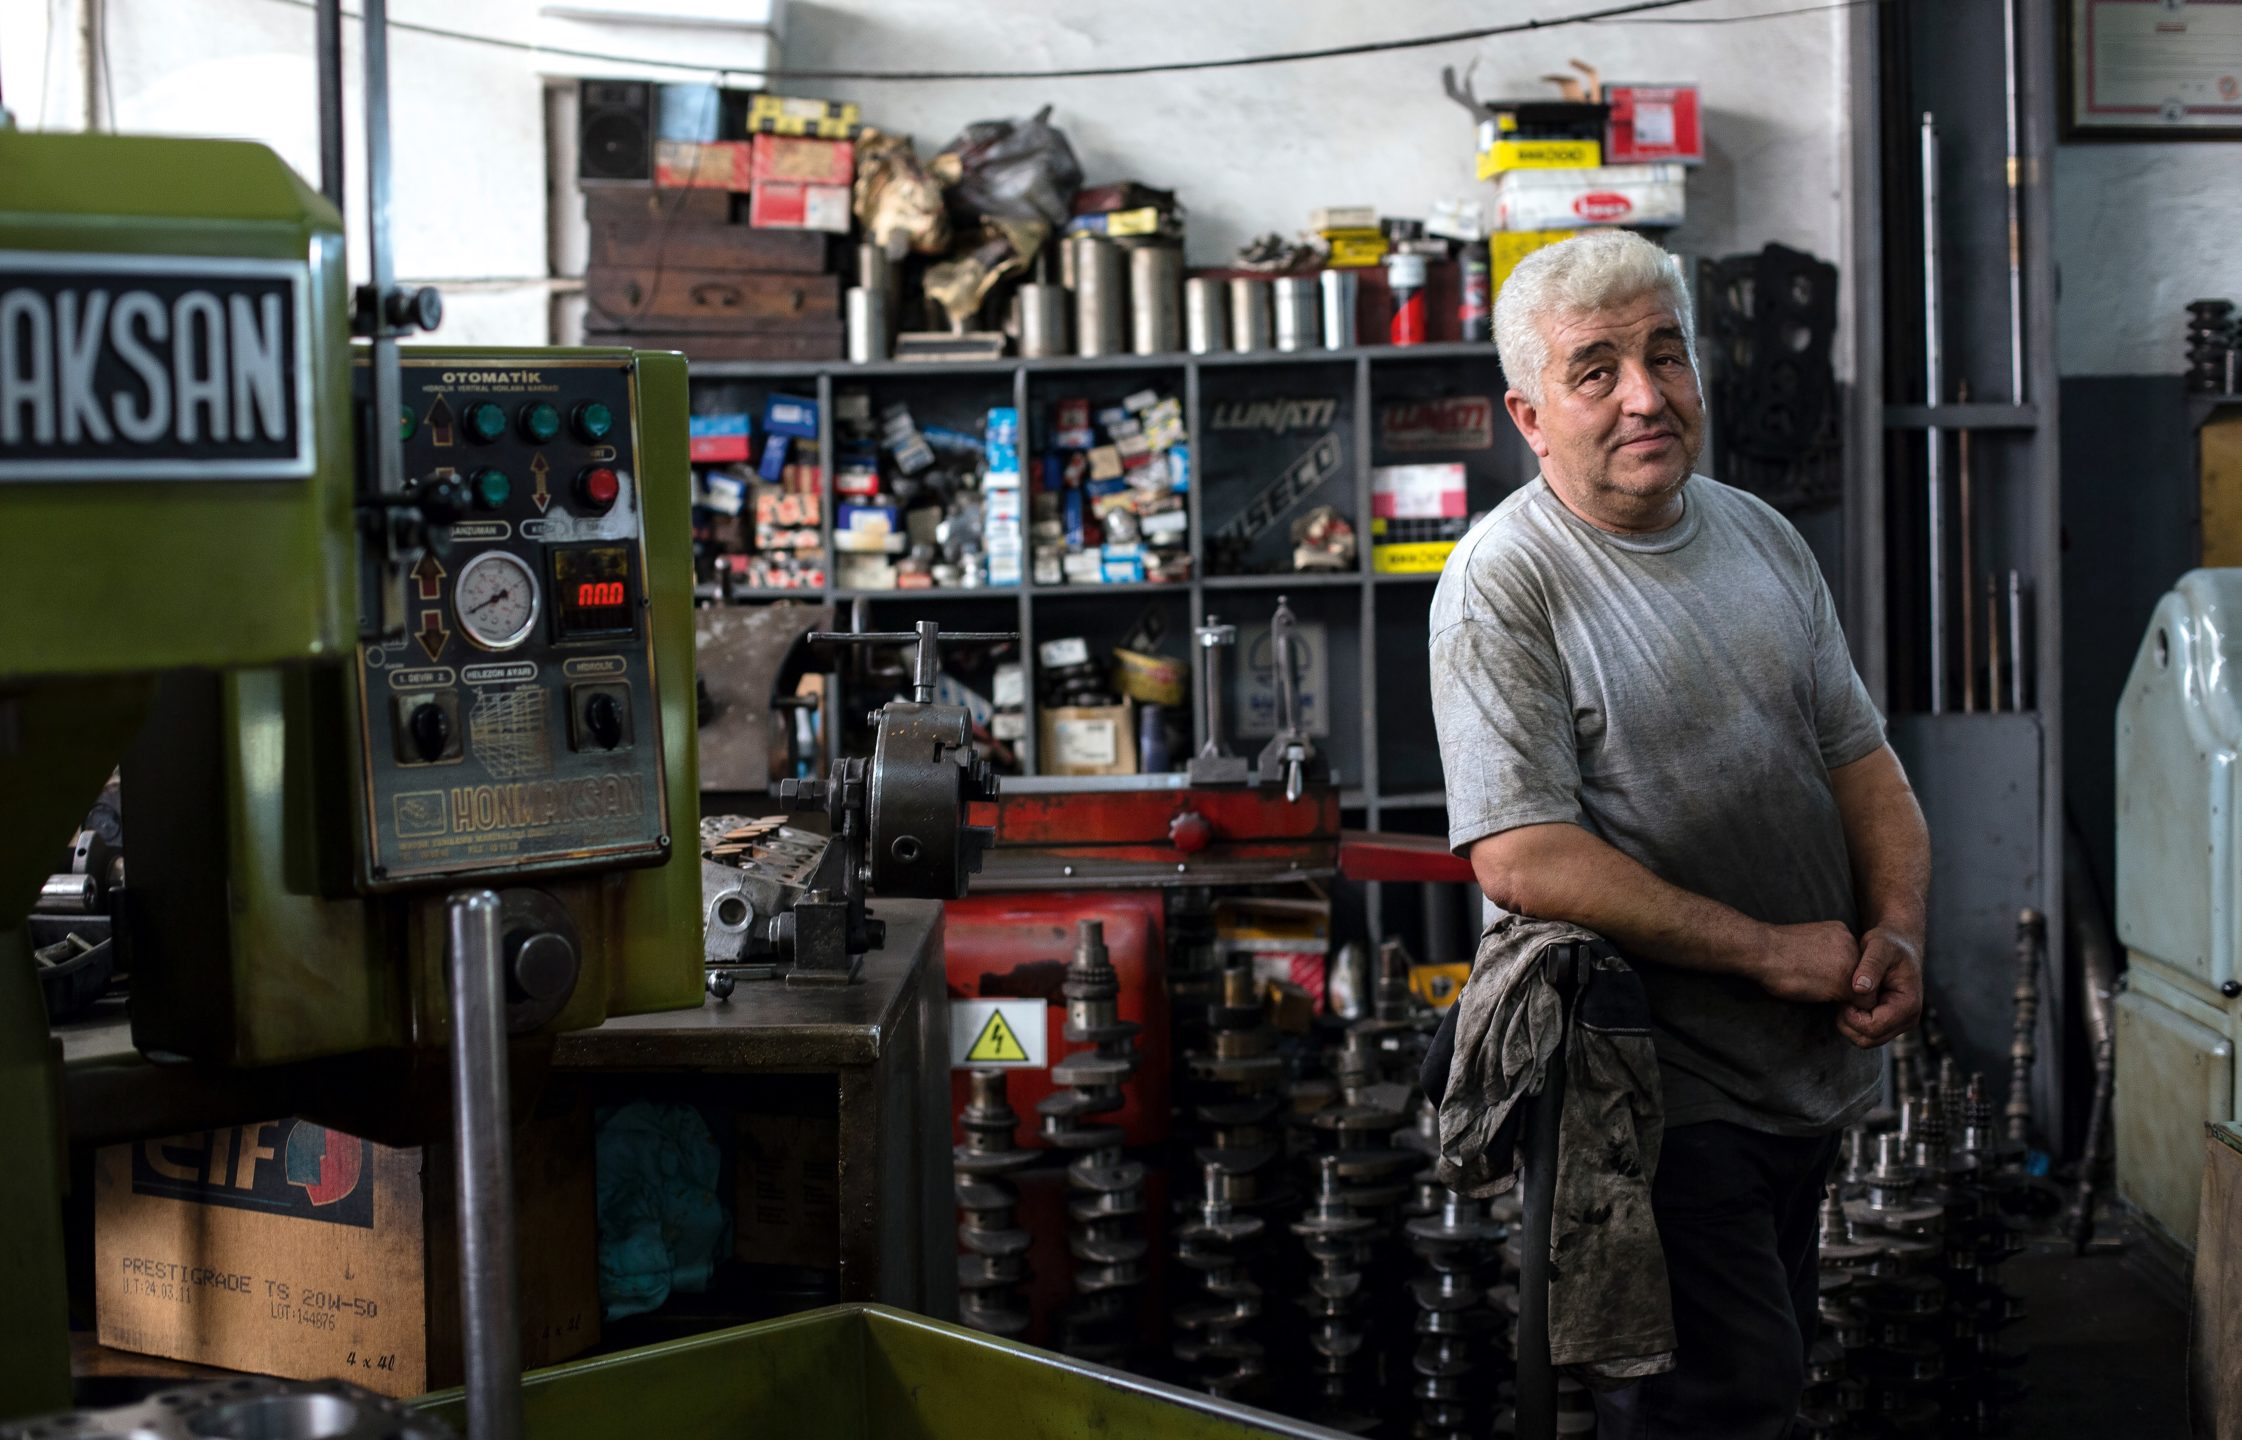 A small business owner in his shop.